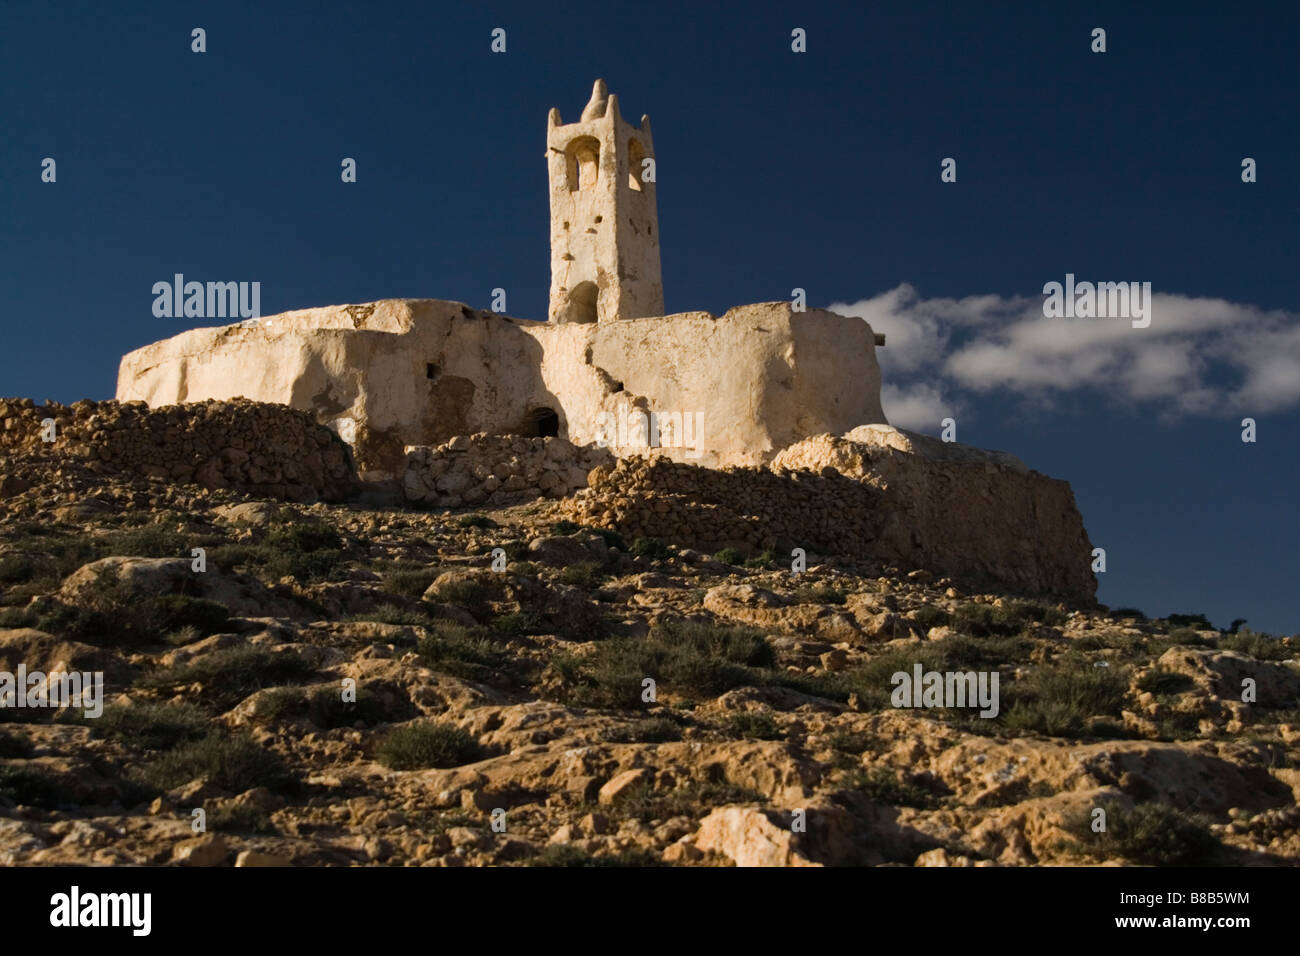 Princess mosque near Yefren, Libya. An example of early islamic architecture, picturesquely located near Yefren - Gharyan road. Stock Photo